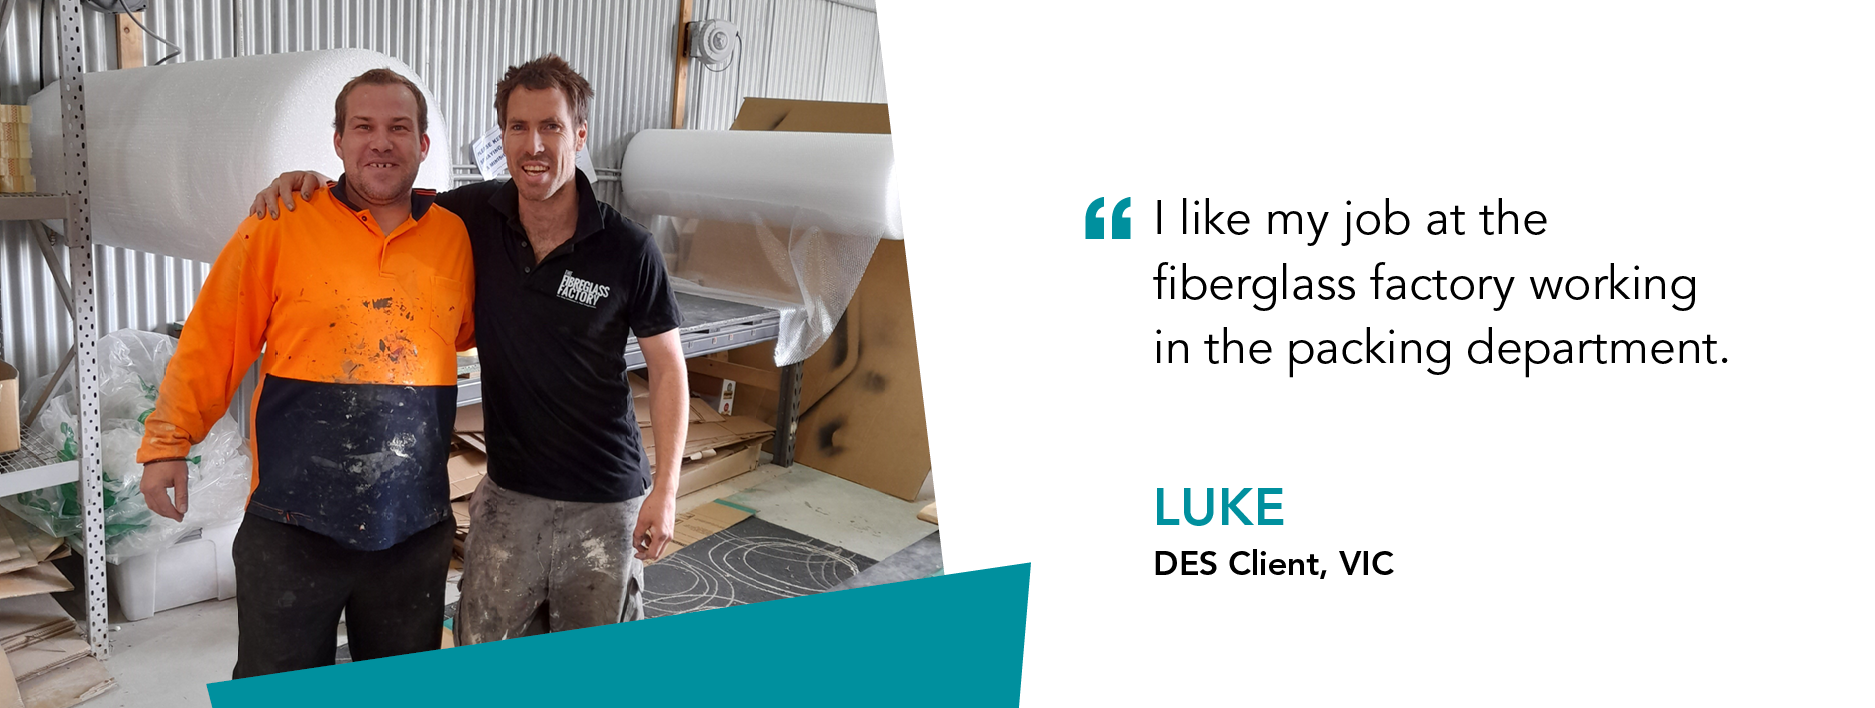 "I like my job at the fibreglass factory working in the packing department." said Luke DES Client Victoriafactory